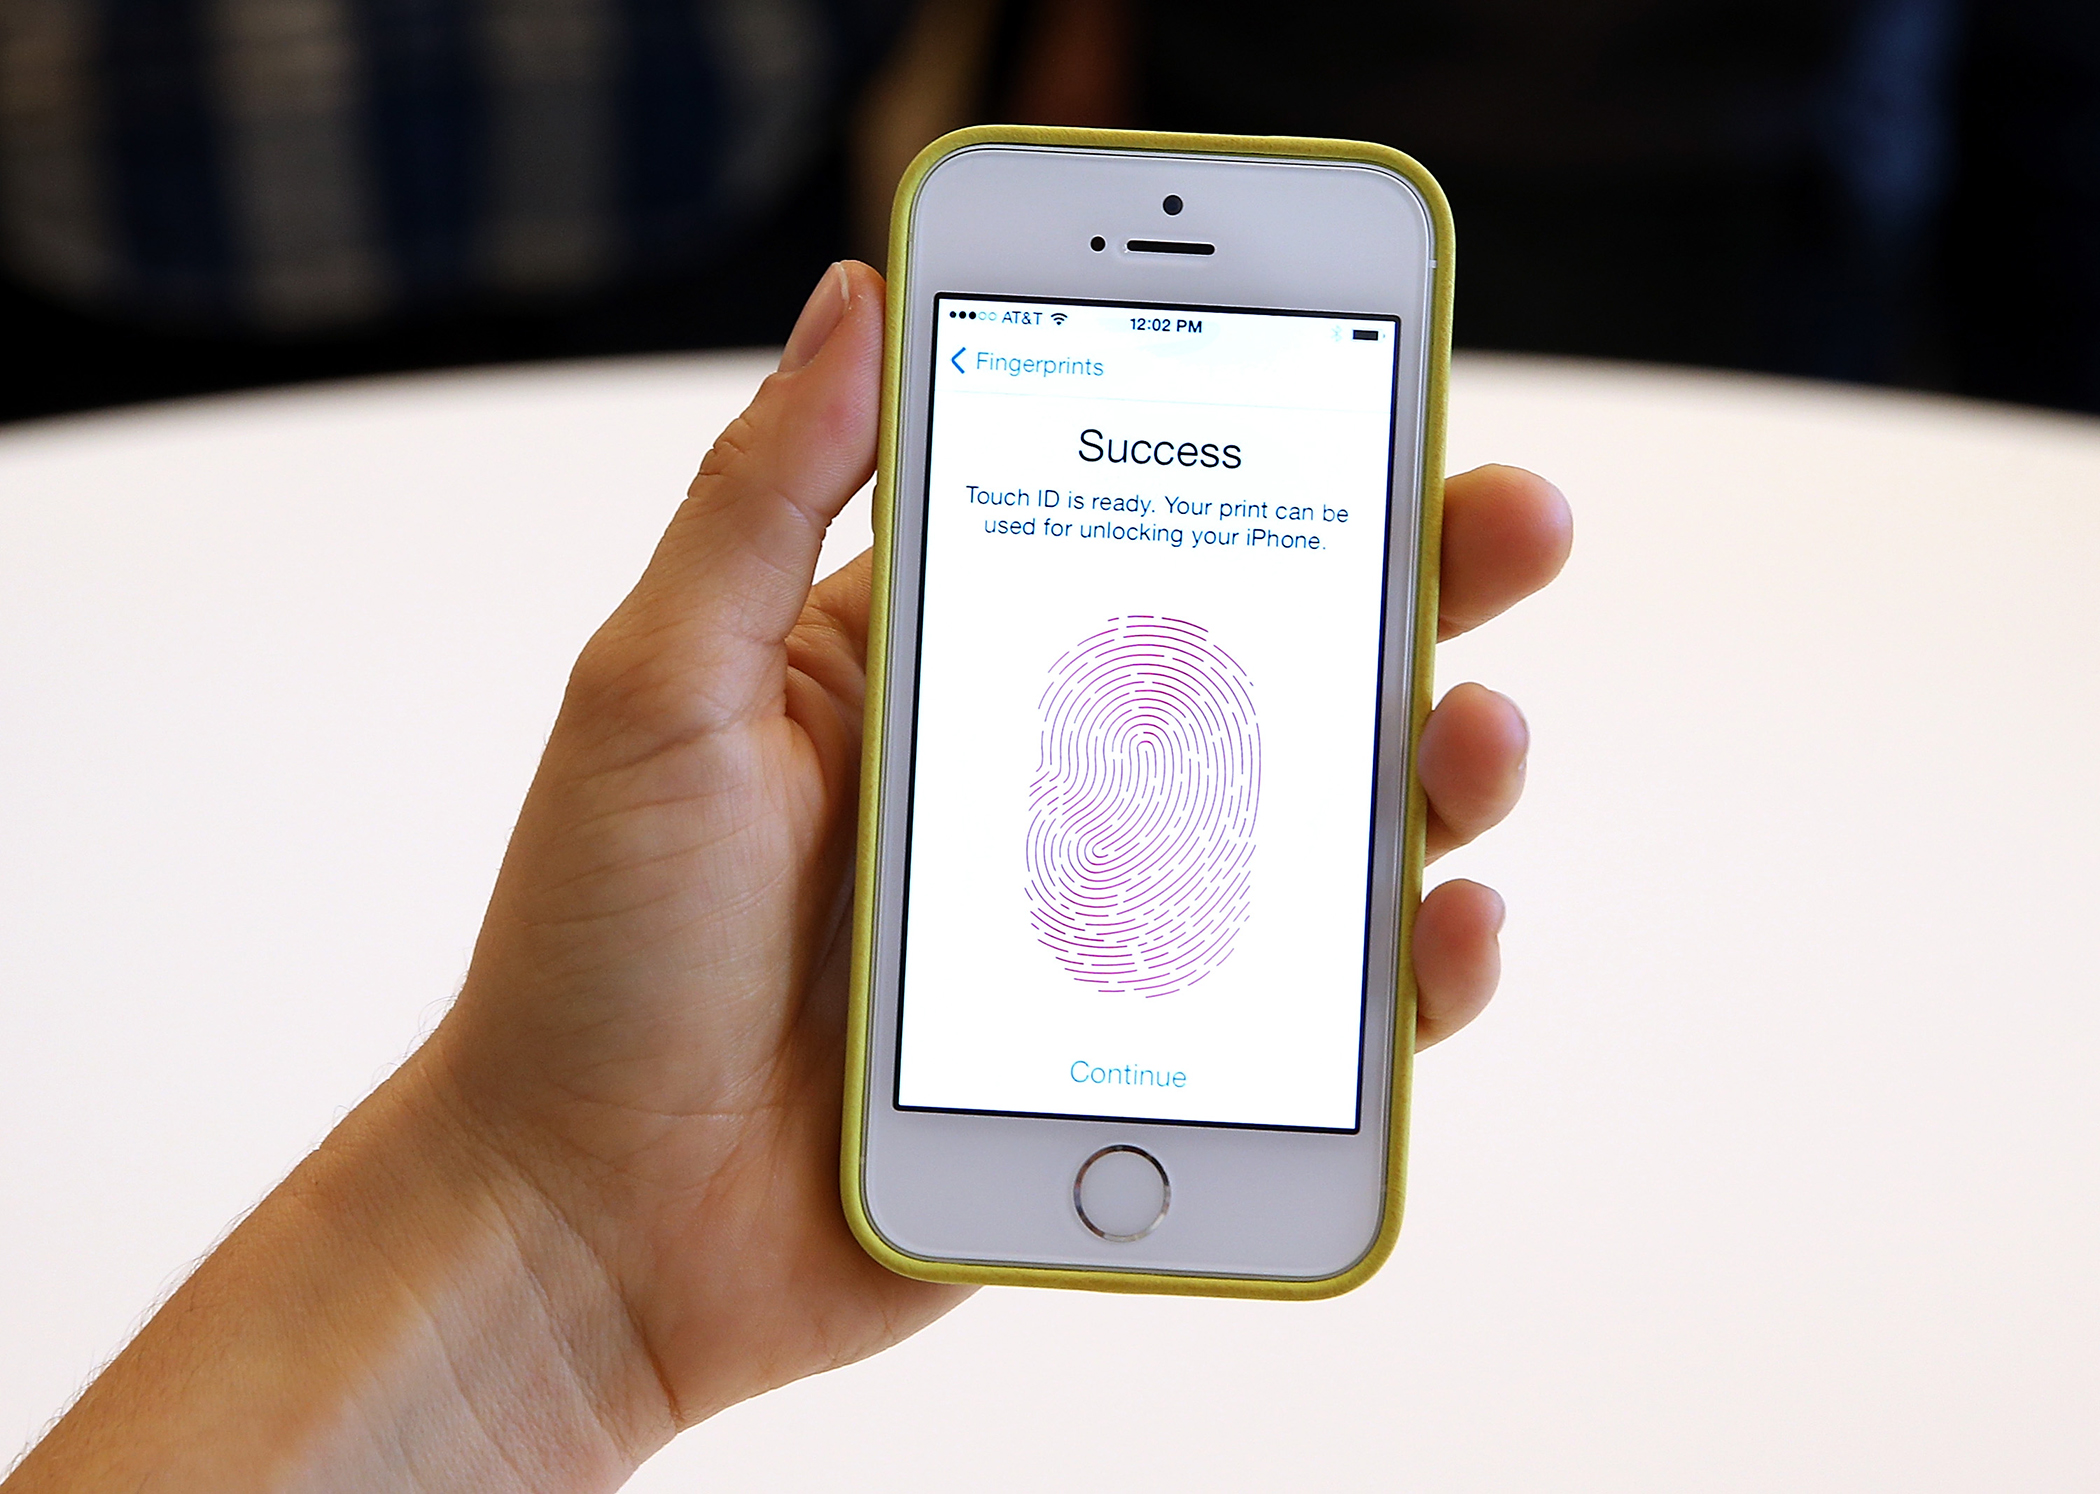 The new iPhone 5S with fingerprint technology is displayed during an Apple product announcement at the Apple campus on September 10, 2013 in Cupertino, California. The company launched the new iPhone 5C model that will run iOS 7 is made from hard-coated polycarbonate and comes in various colors and the iPhone 5S that features fingerprint recognition security.